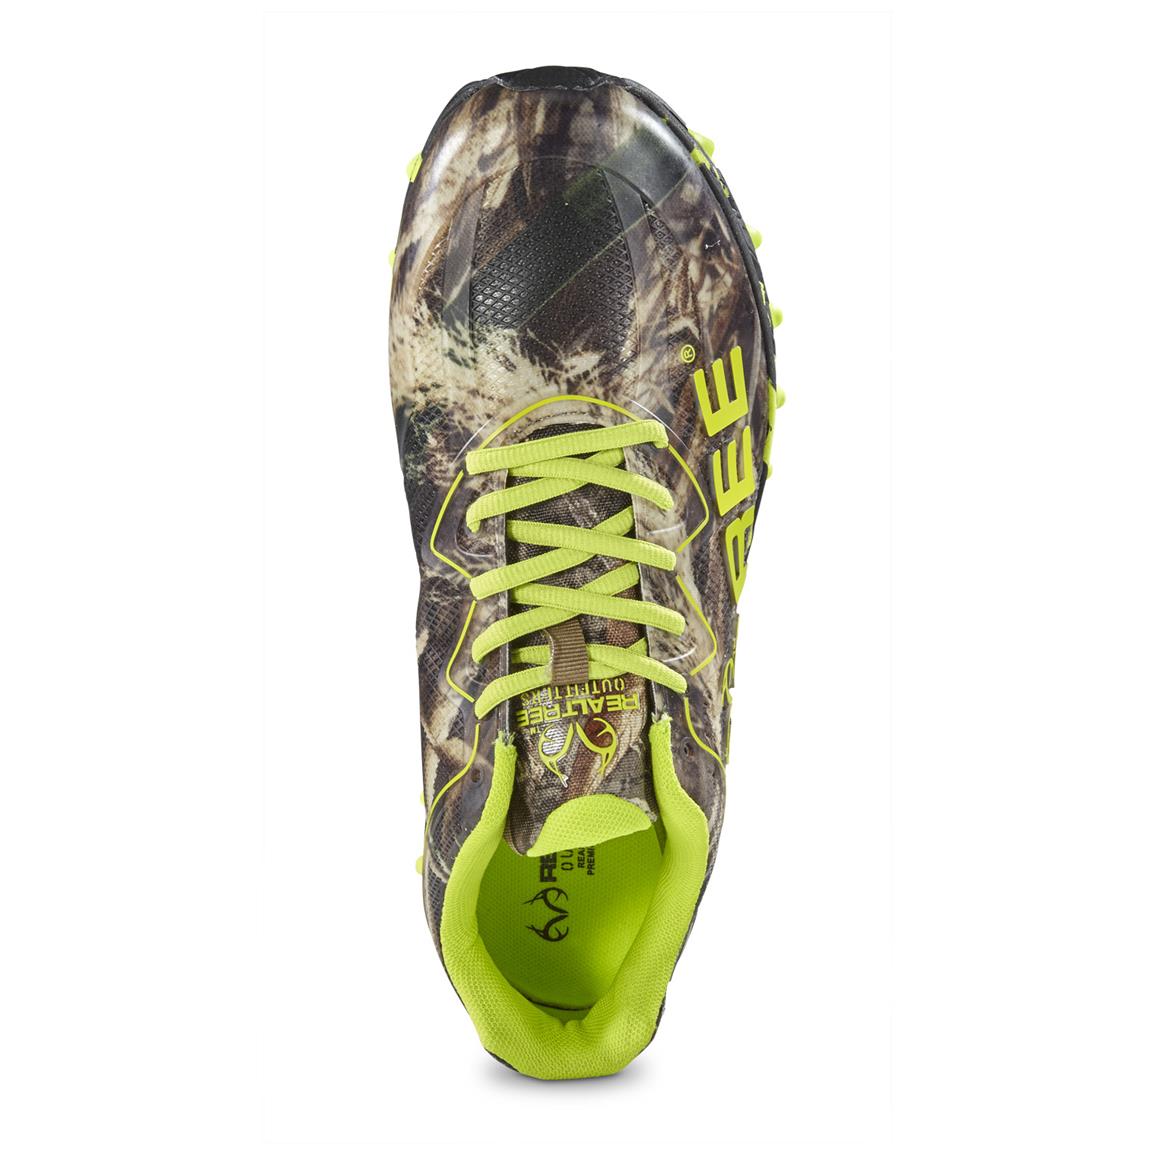 realtree panther shoes